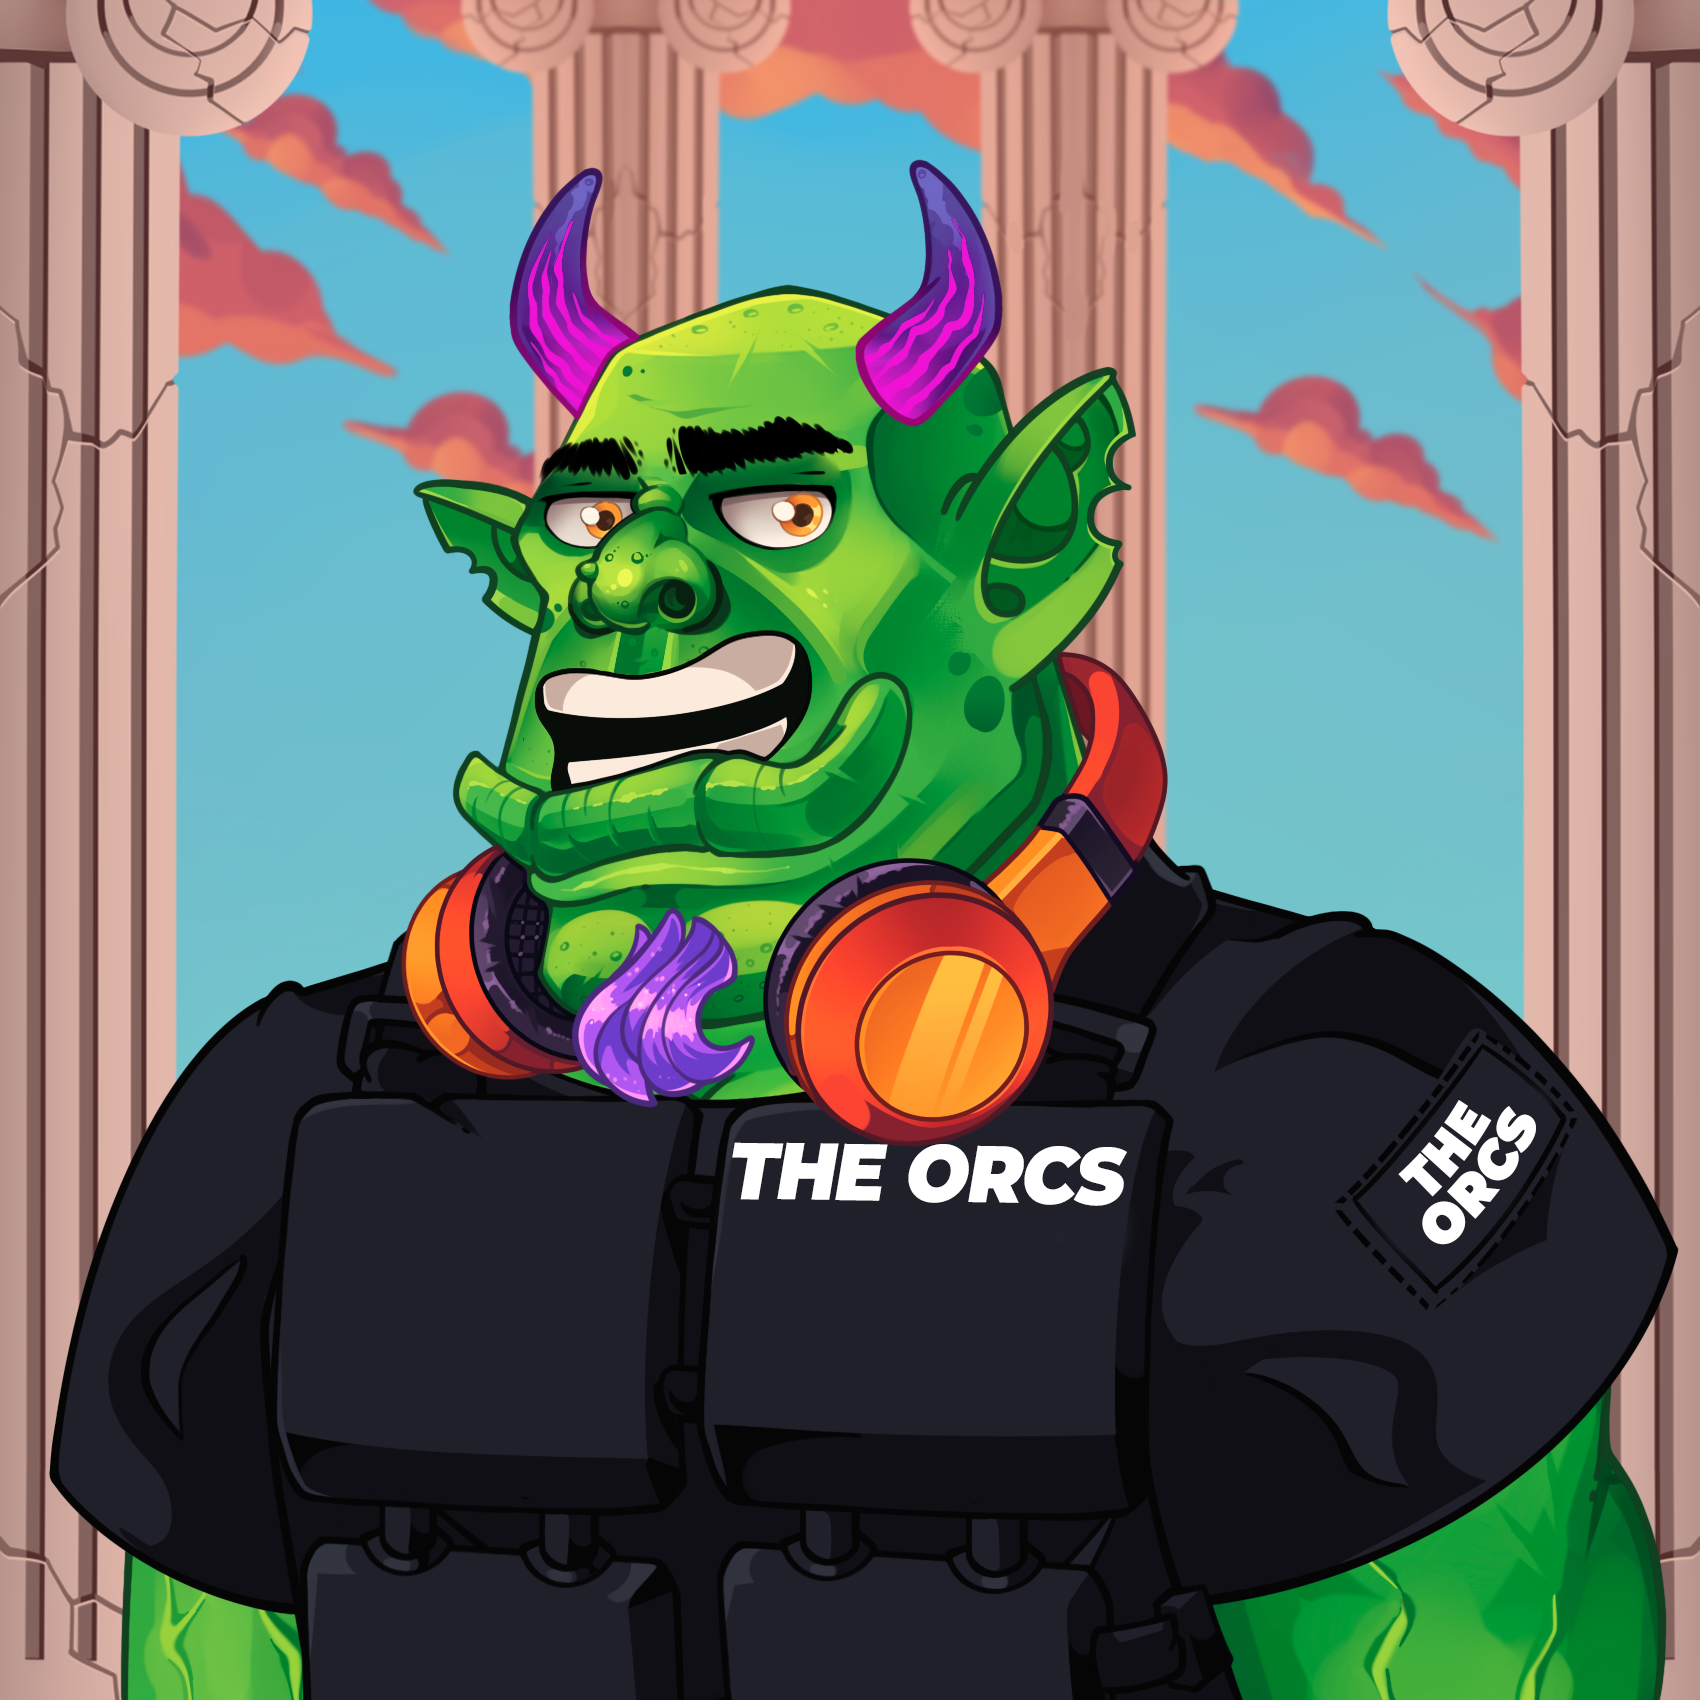 The Orcs #960